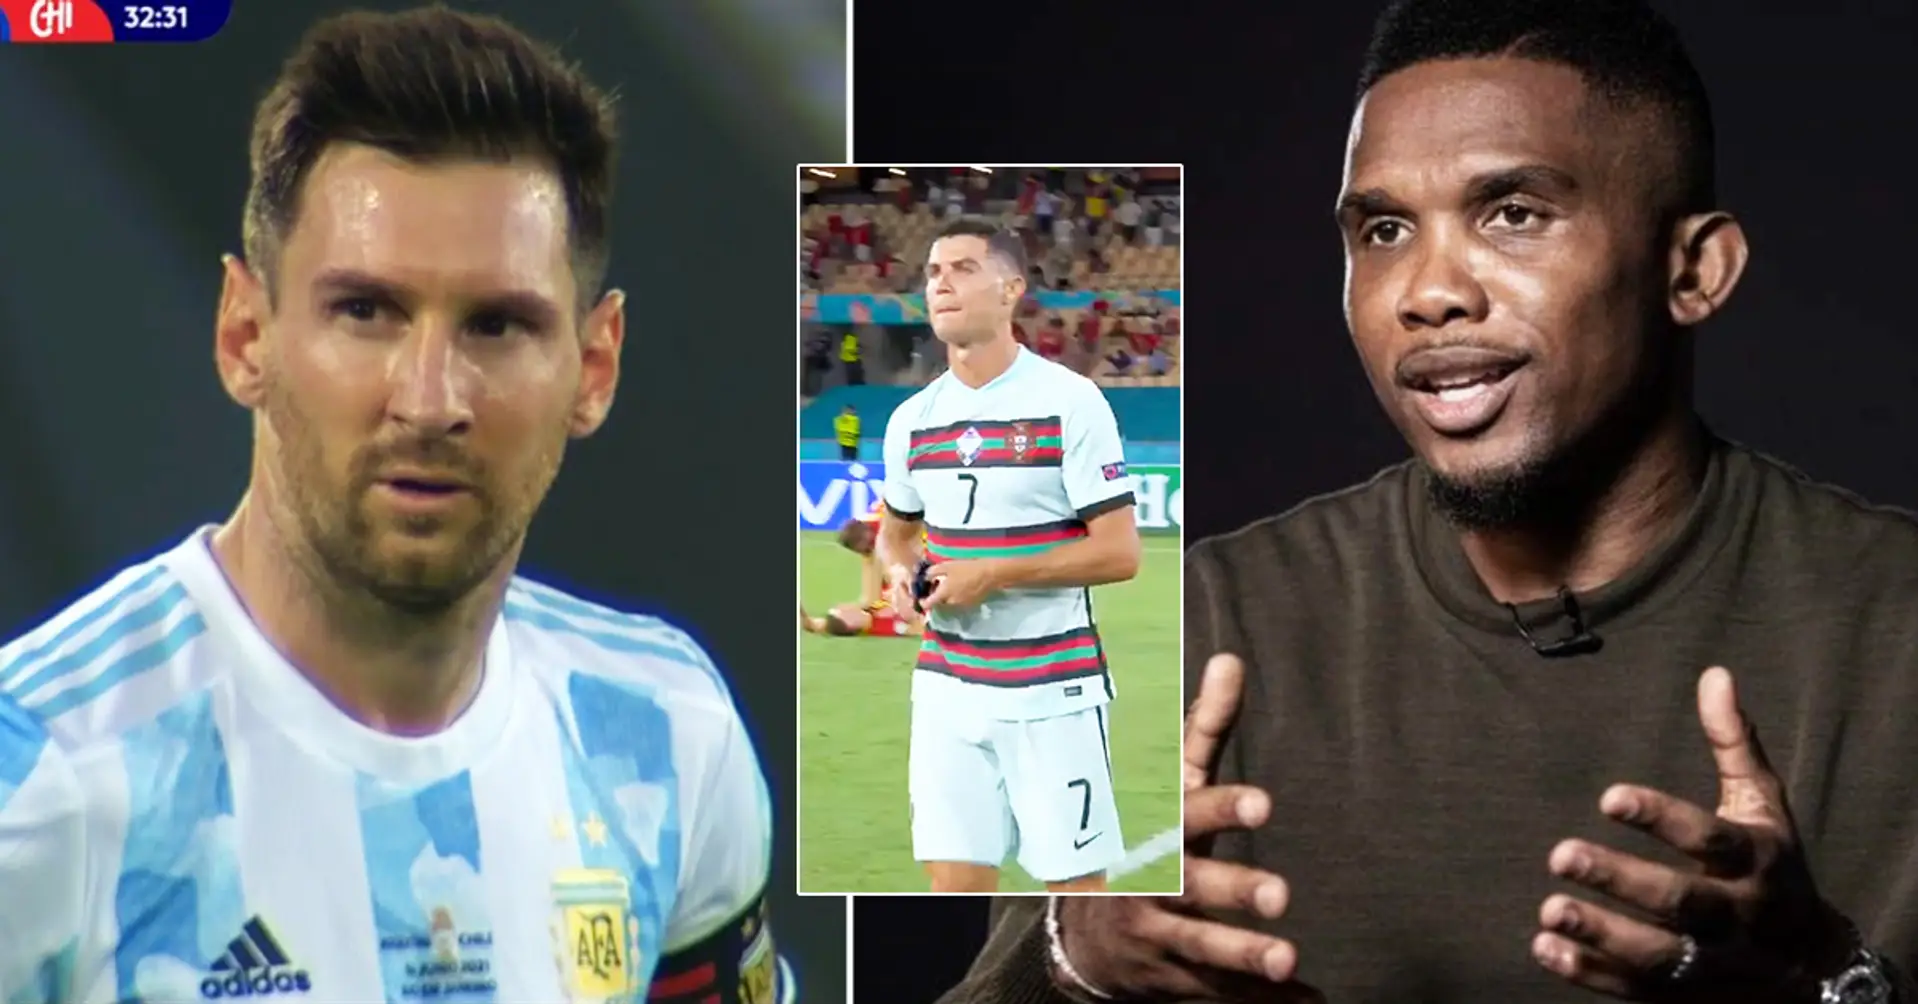 Samuel Eto’o names ‘new football God’: ‘He is coming for when Messi and Ronaldo get tired’